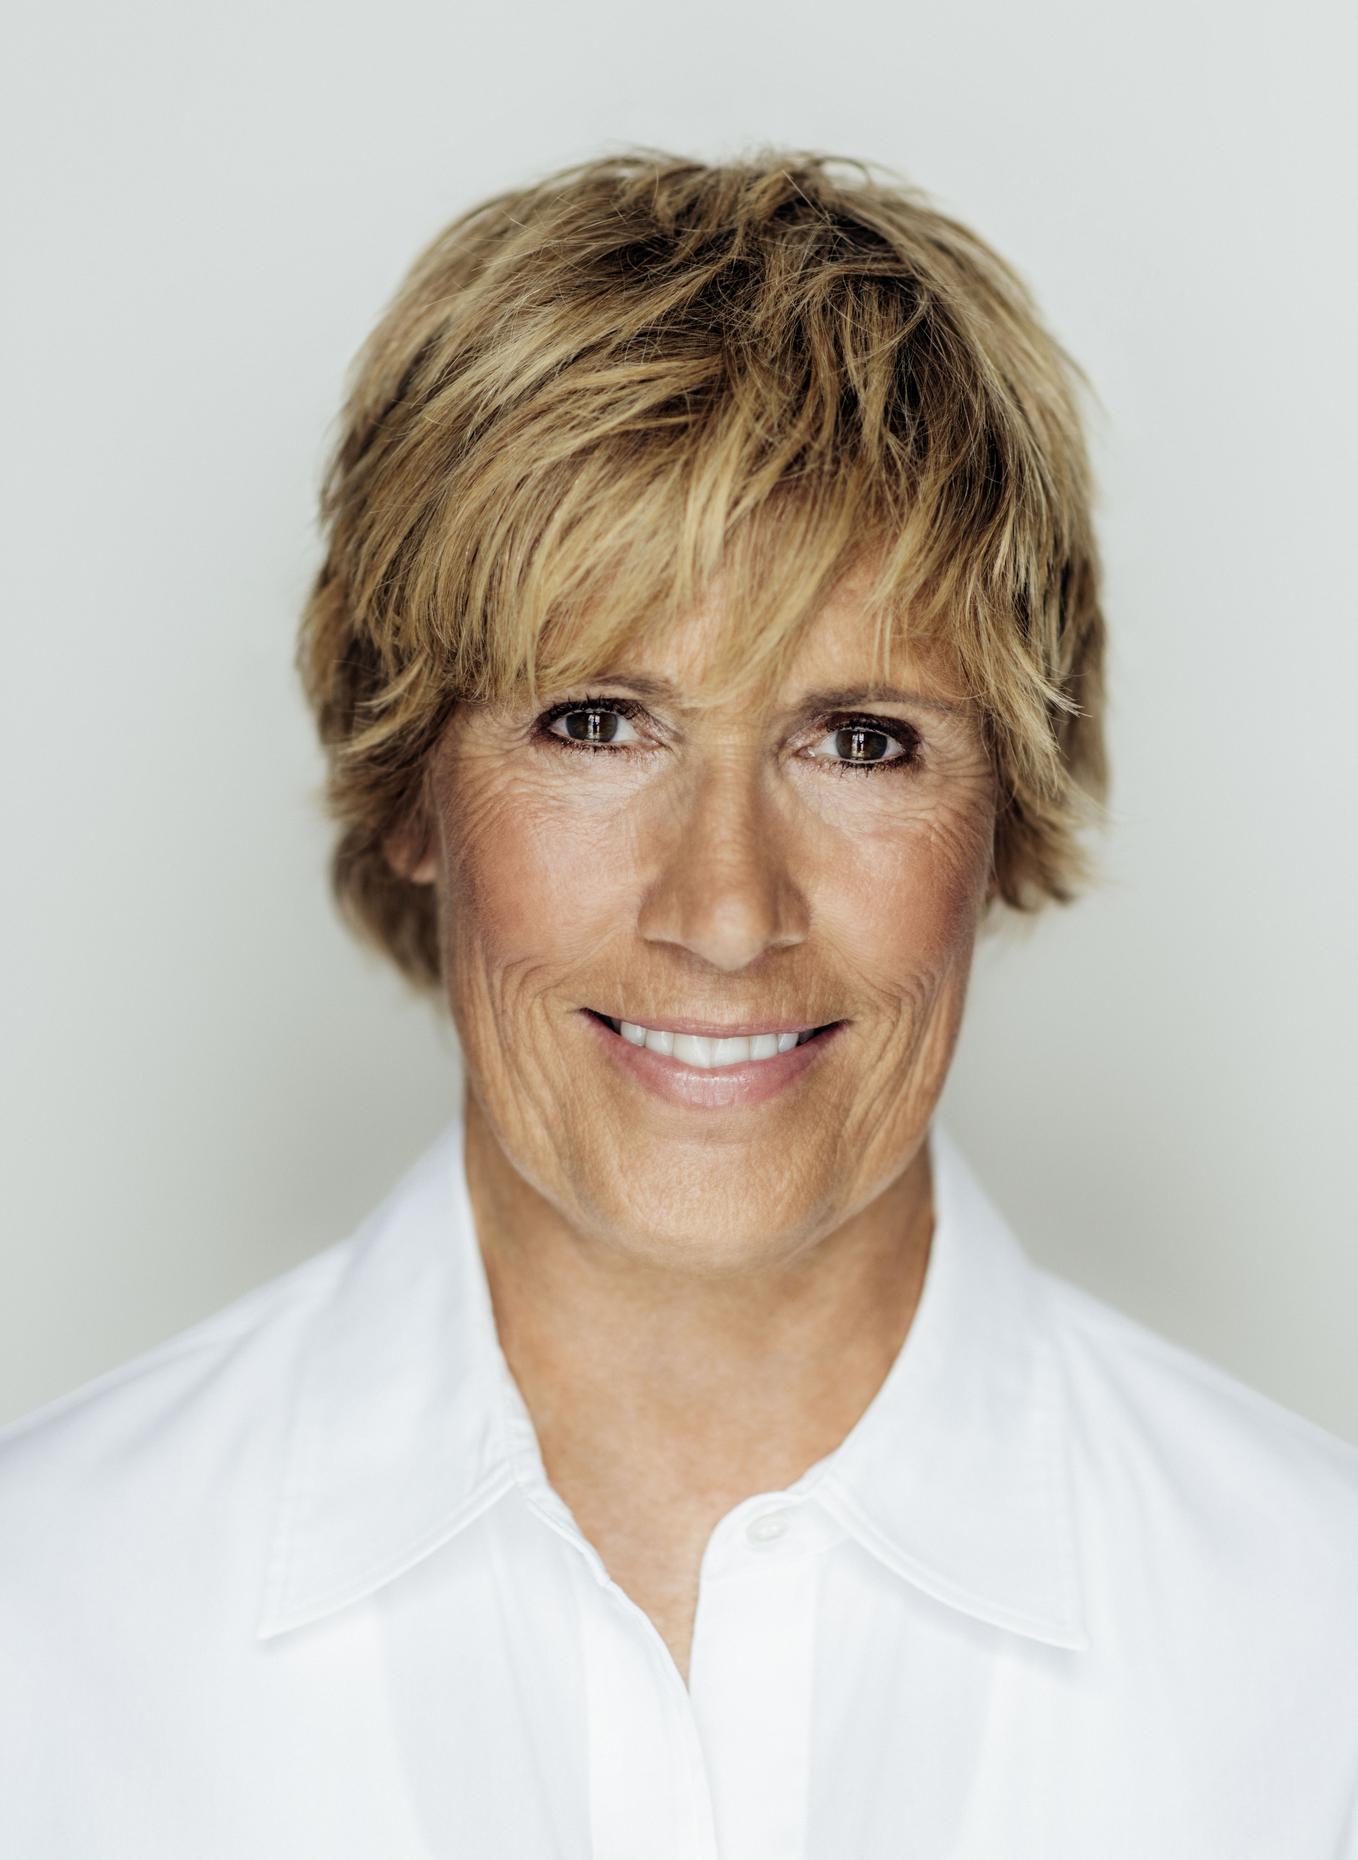 How Diana Nyad Overcame Years of Adversity and Swam From Cuba to